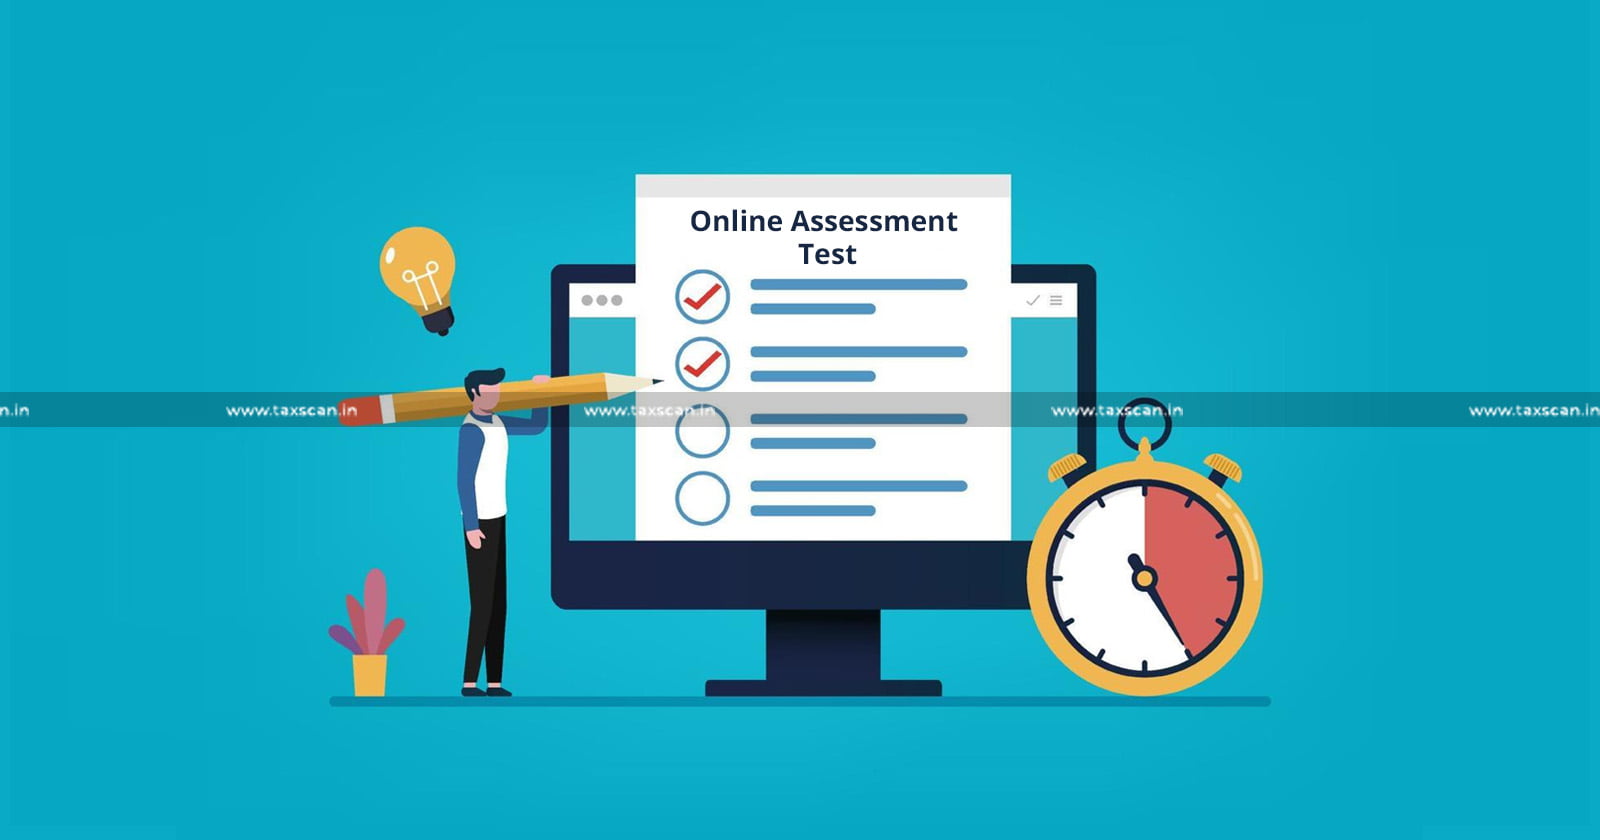 ICAI notifies Date of Online Assessment Test - Online Assessment Test - Assessment Test - Certificate Course Forex and Treasury Management (FXTM) - Taxscan